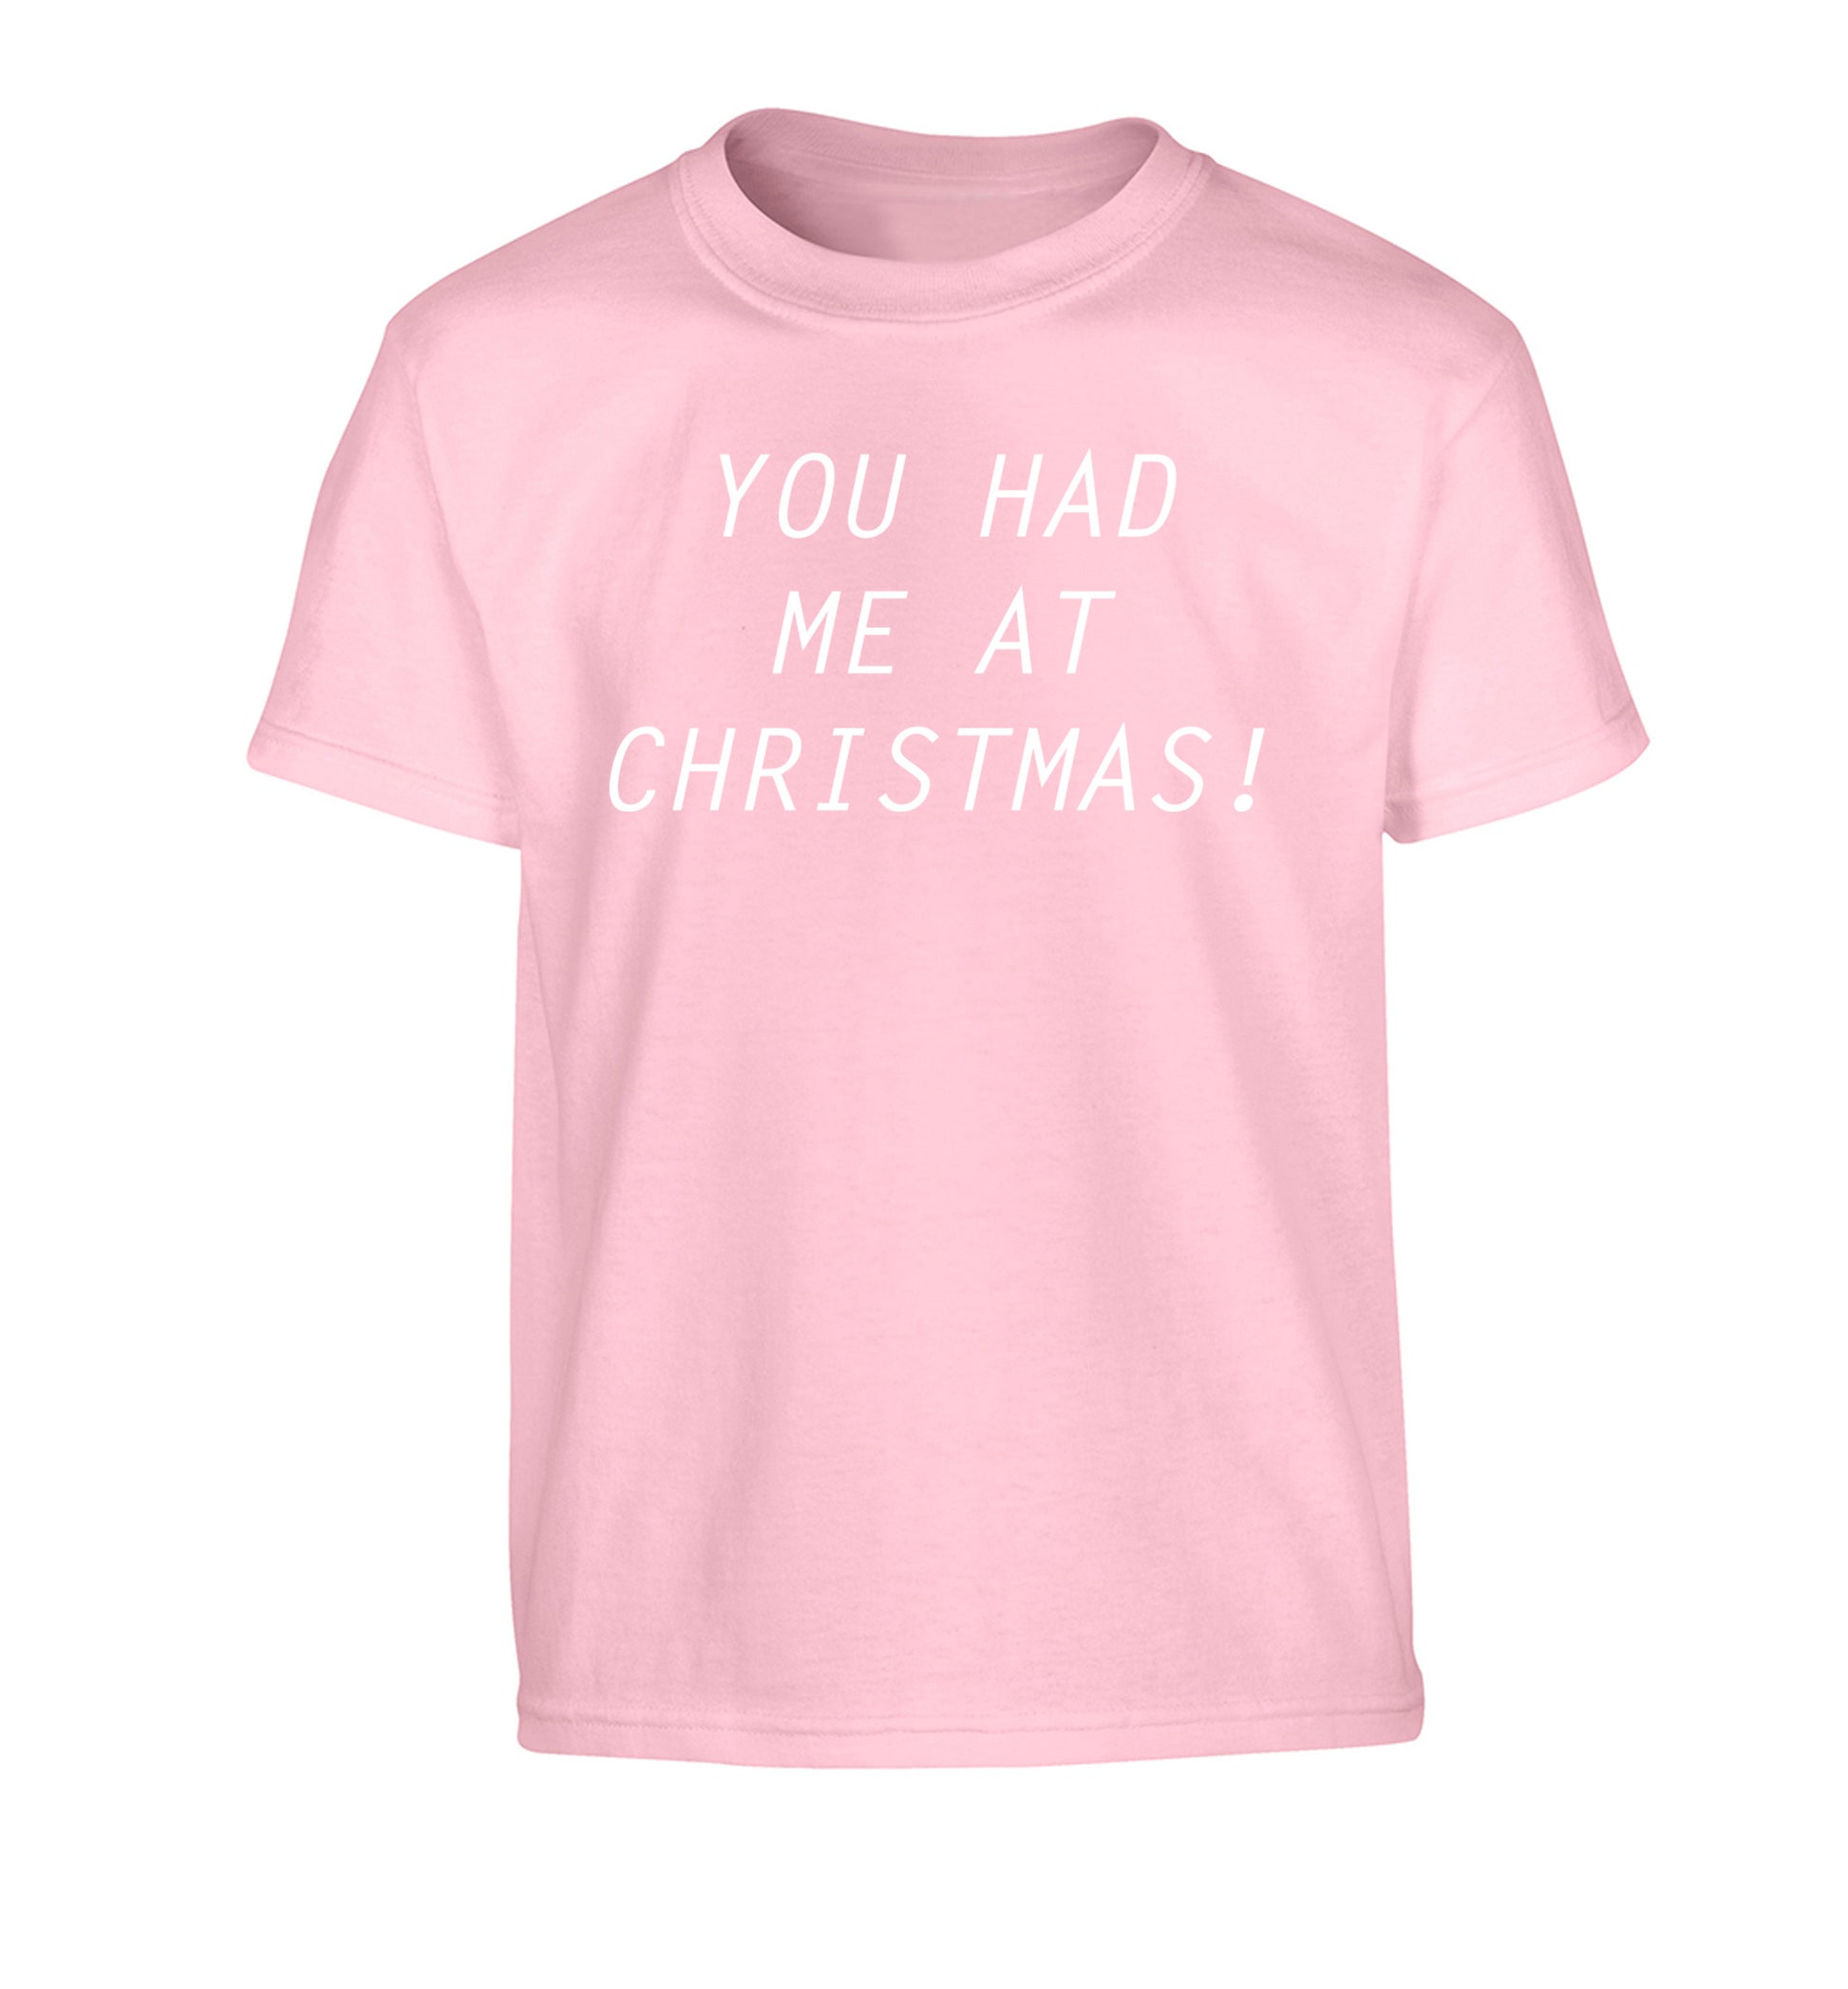 You had me at Christmas Children's light pink Tshirt 12-14 Years